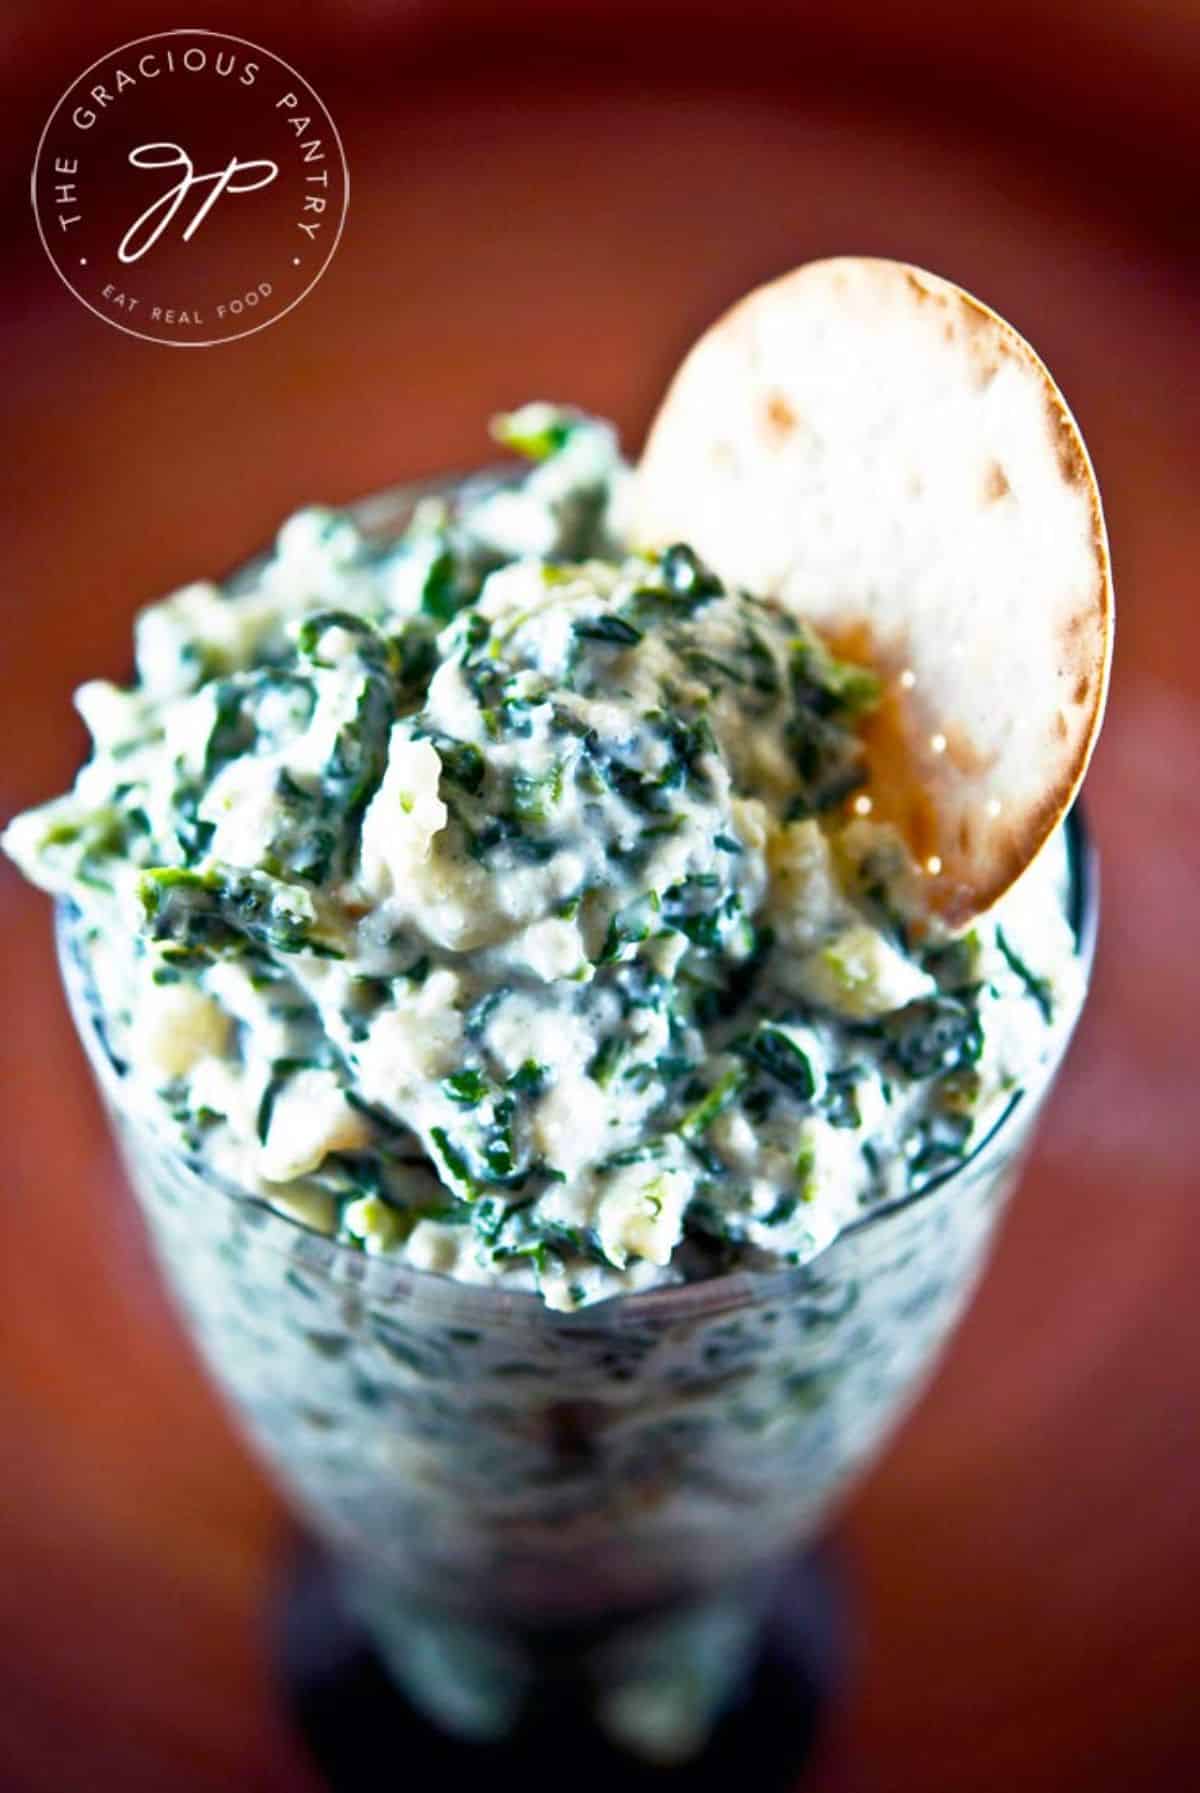 Creamy spinach dip in a glass cup with a cracker.